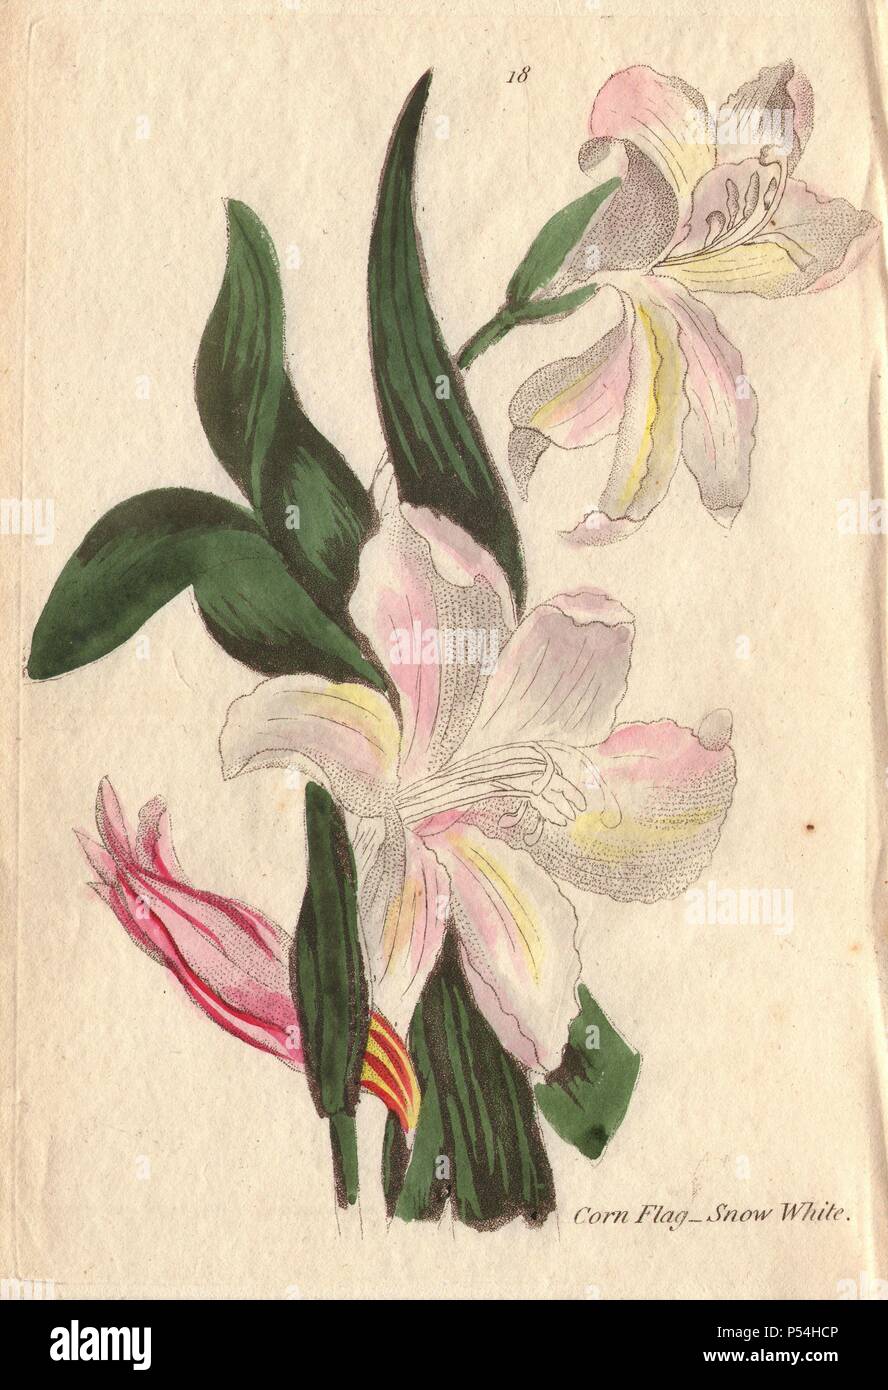 Snow-white cornflag, Gladiolus blandus (var. B), with white flowers tinged with pink and yellow.. Illustration by Henrietta Moriarty from 'Fifty Plates of Greenhouse Plants' (1807), a re-issue of her own 'Viridarium' (1806), with handcoloured copperplate engravings. Moriarty was a colonel's widow who turned to writing novels and illustrating botanical books to support her four children. Stock Photo